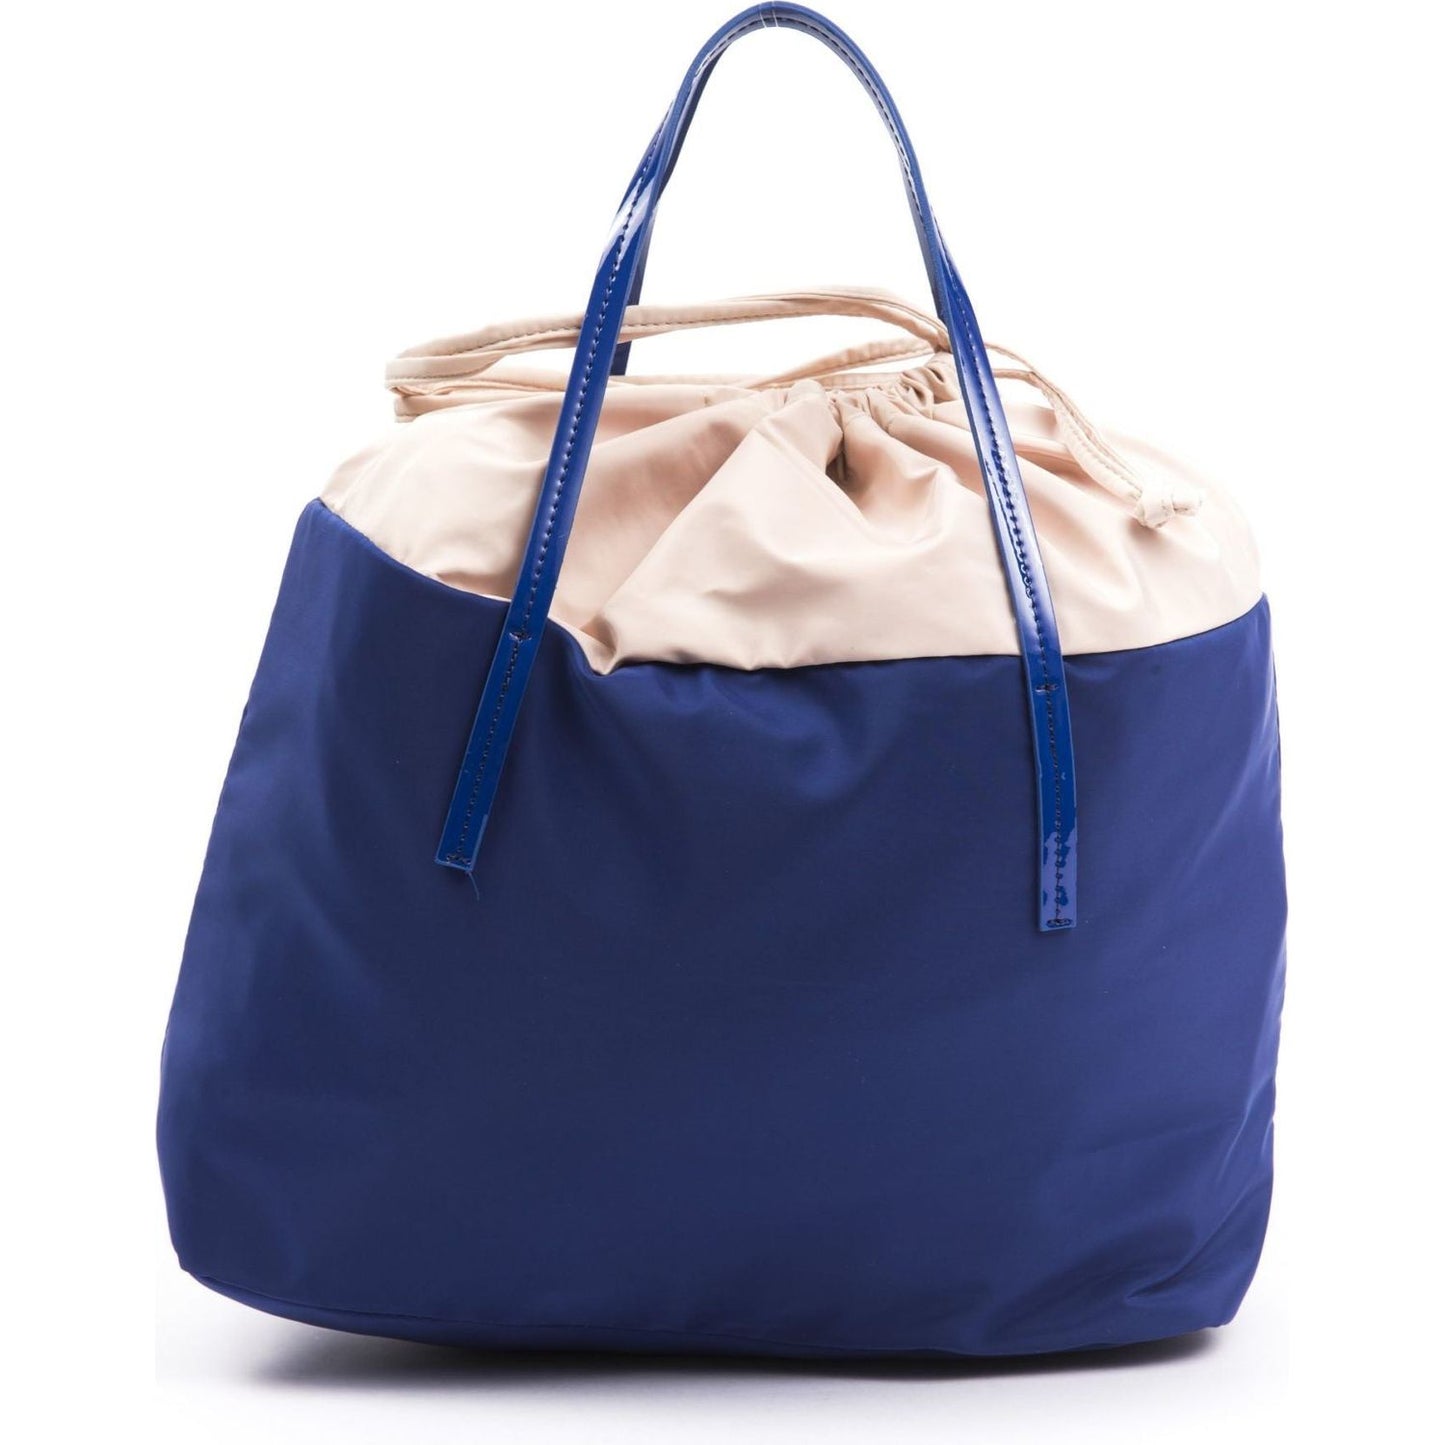 BYBLOS Chic Blue Fabric Shopper Tote with Patent Accents chic-blue-fabric-shopper-tote-with-patent-accents